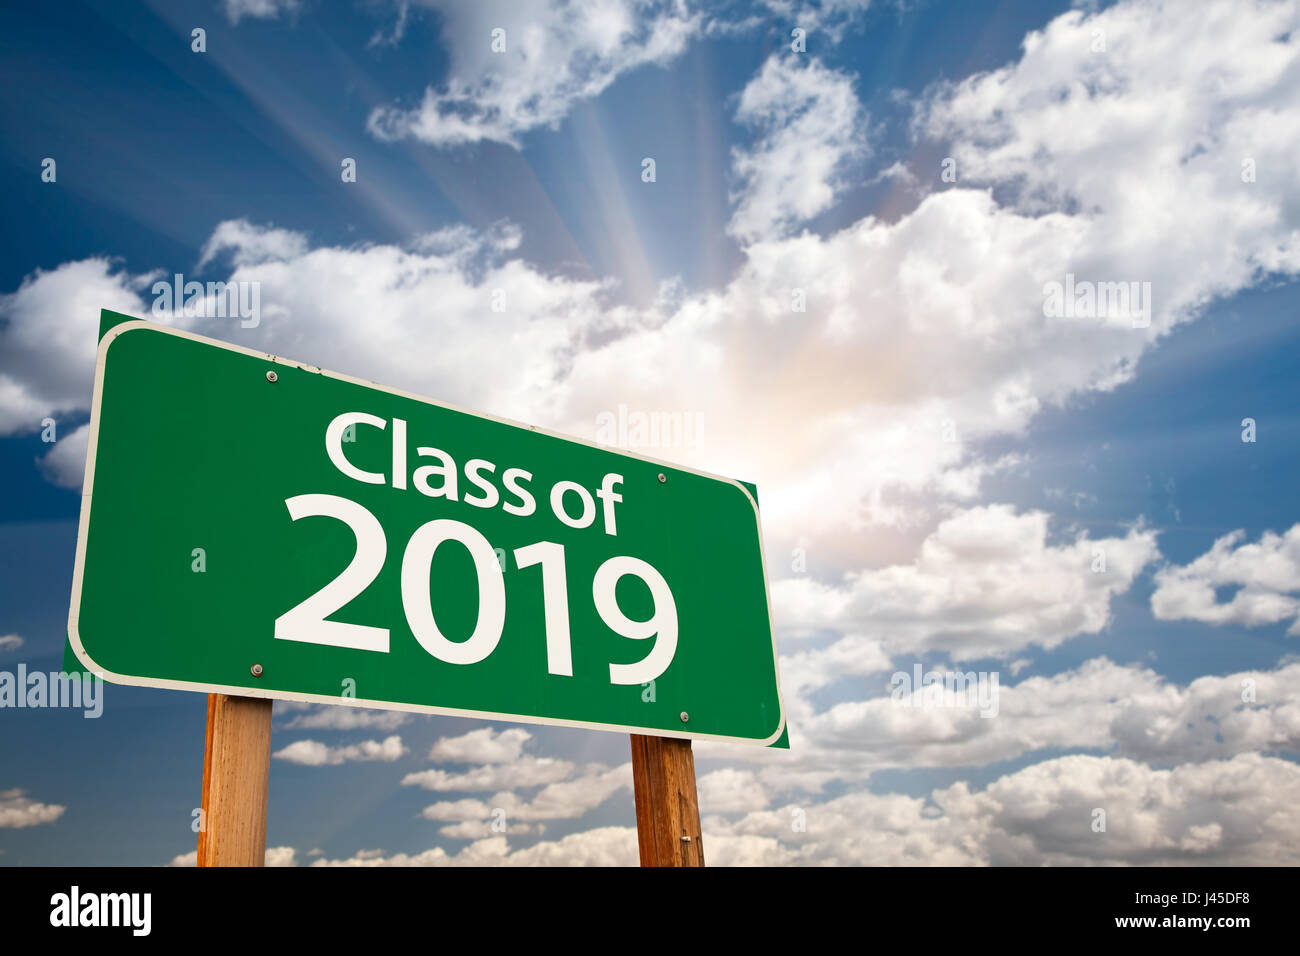 Class of 2019 Green Road Sign with Dramatic Clouds and Sky. Stock Photo